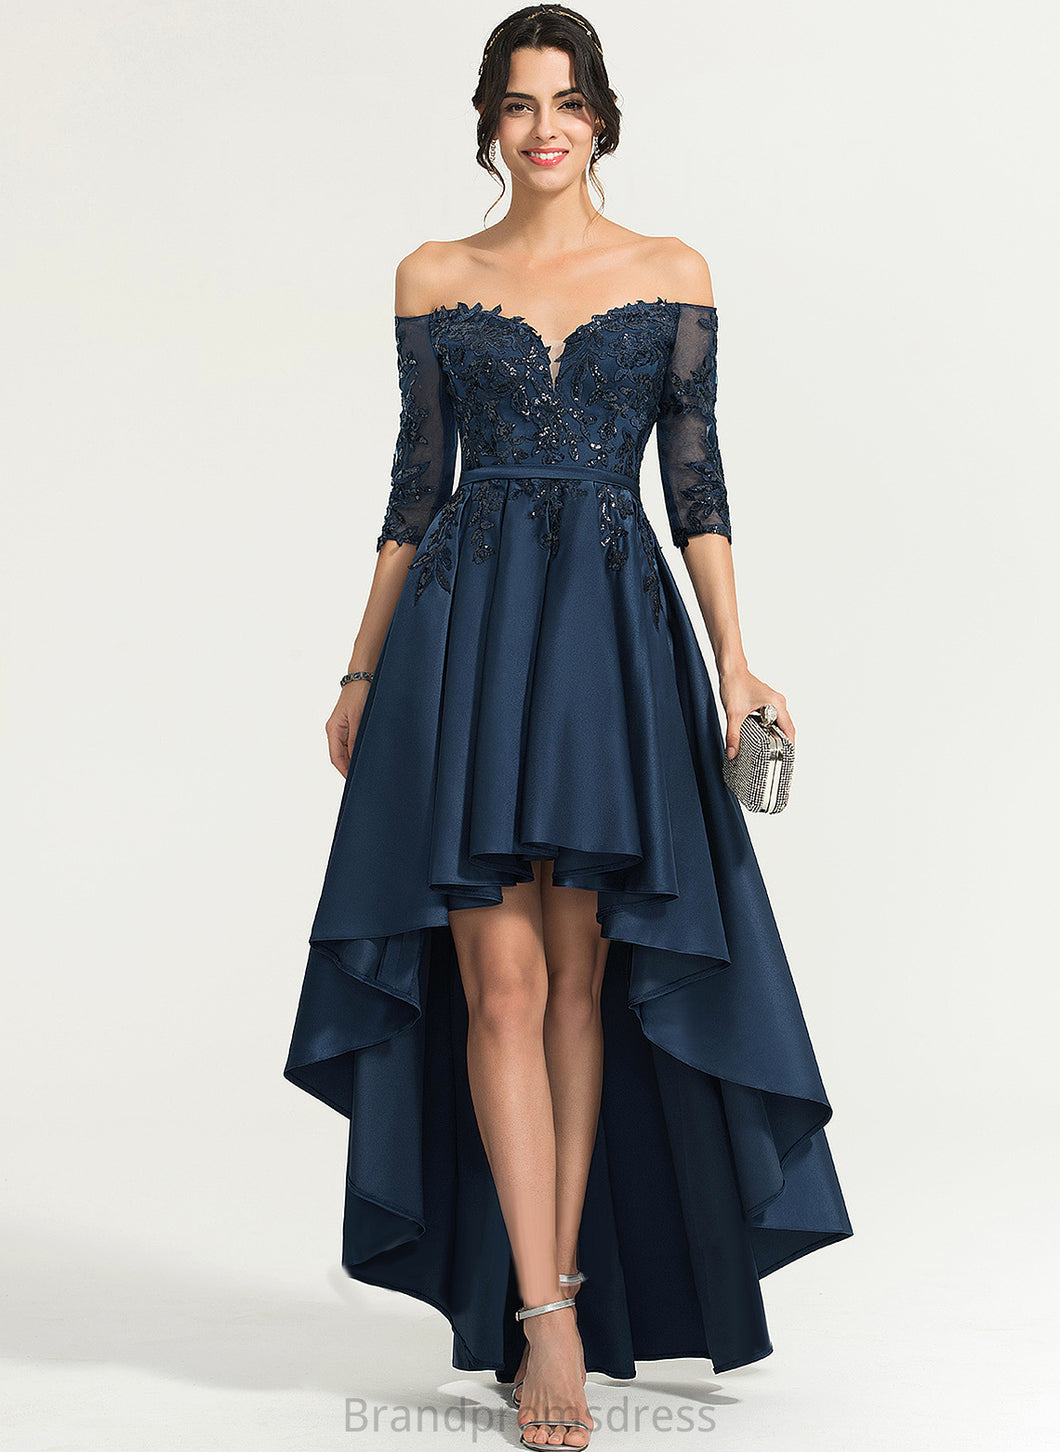 Homecoming Satin Asymmetrical Homecoming Dresses Dress Izabella A-Line With Off-the-Shoulder Lace